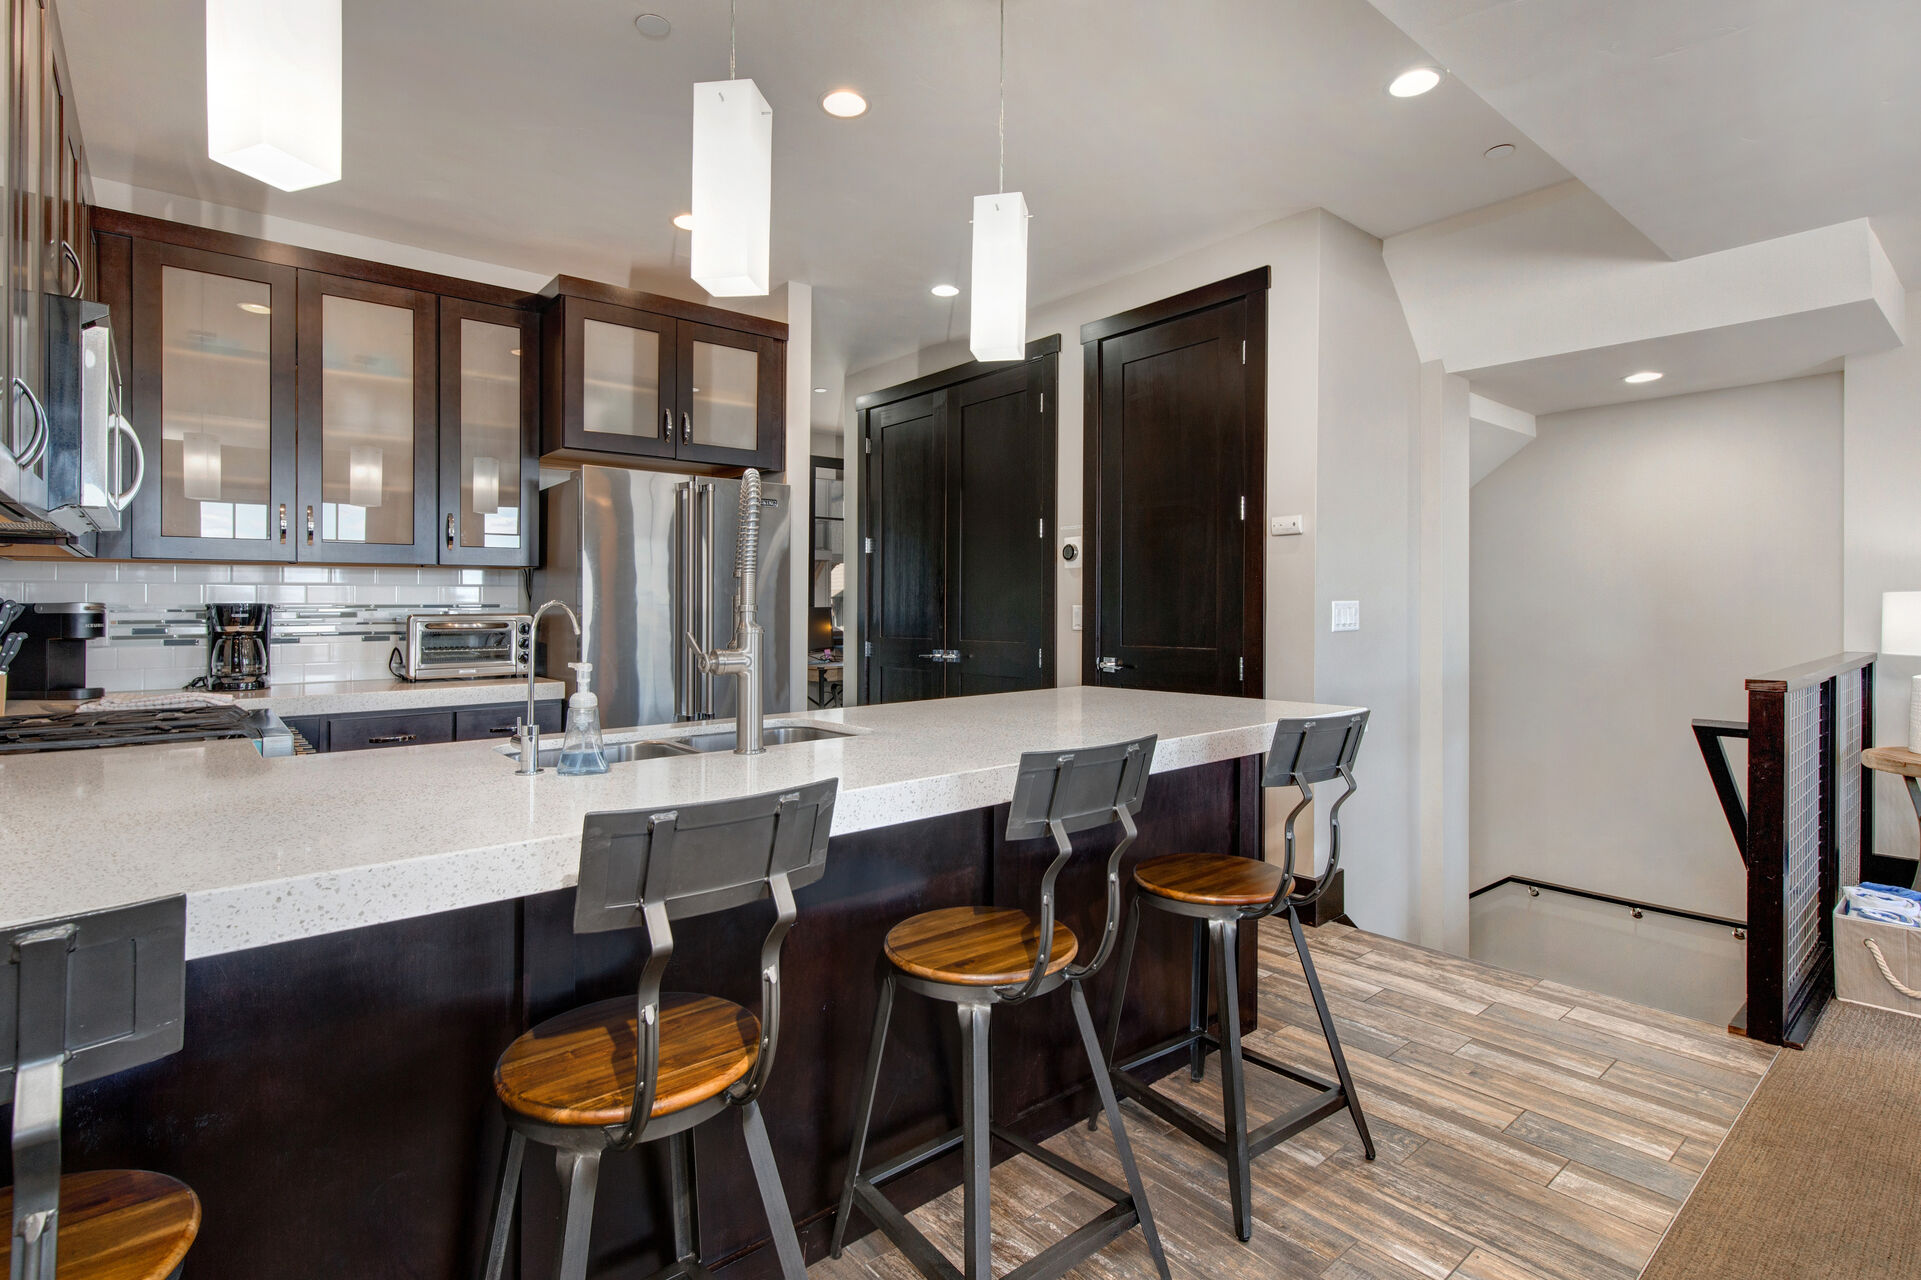 Main Level Fully Equipped Kitchen with beautiful stone countertops, stainless steel Viking appliances, and bar seating for four